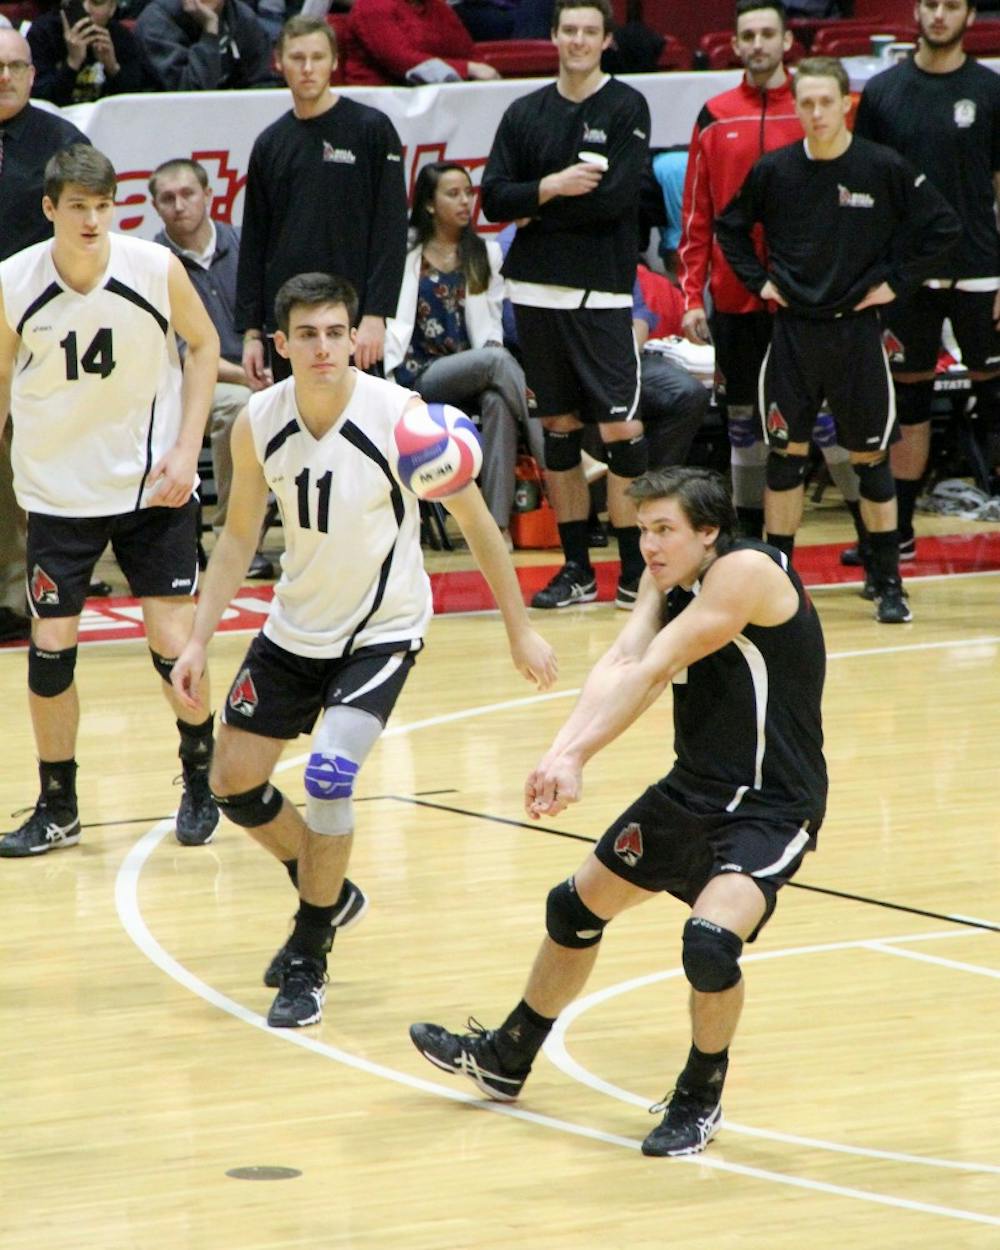 PREVIEW: No. 11 Ball State men's volleyball prepares for home, away matches vs. Fort Wayne 